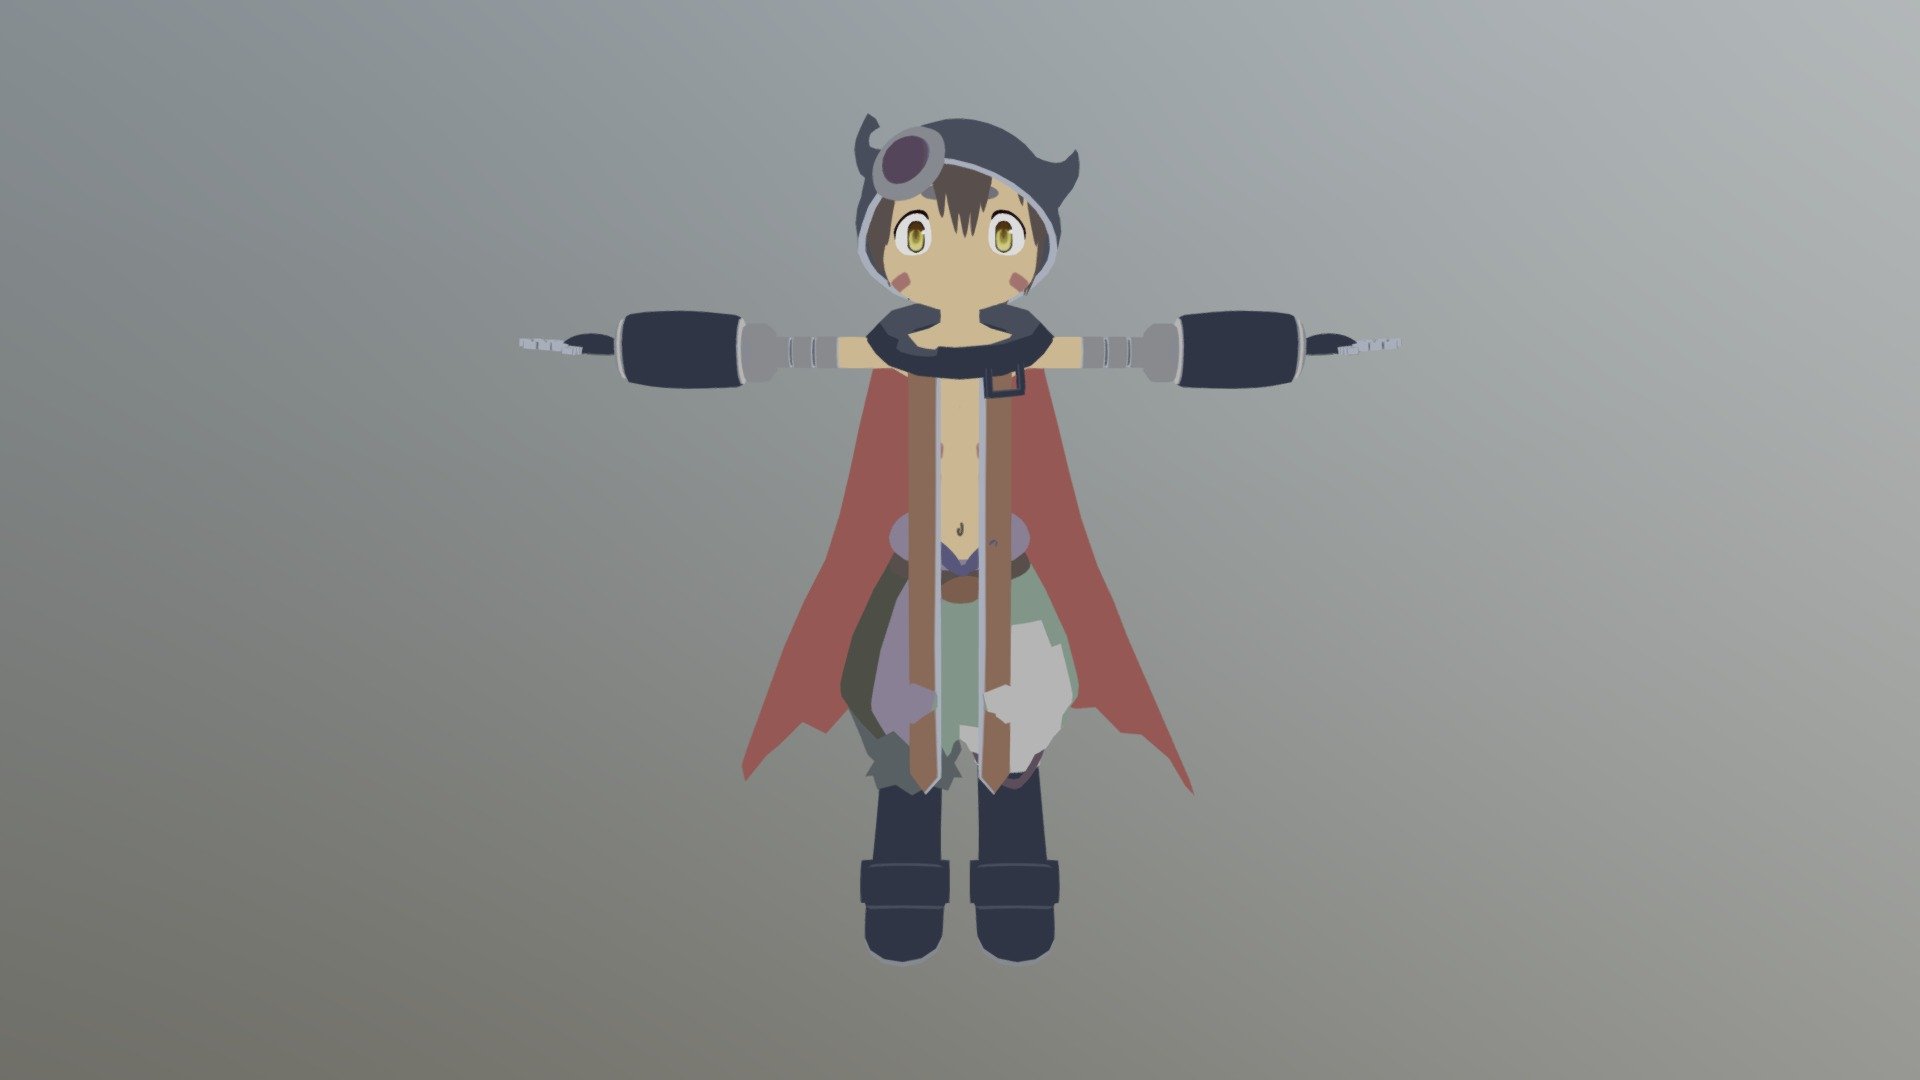 A model i made from scratch based on Reg from Made in Abyss.
model is intended for vrchat and was rigged acordingly for it.
Attached file is fully rigged model and textures if purchased 3d model